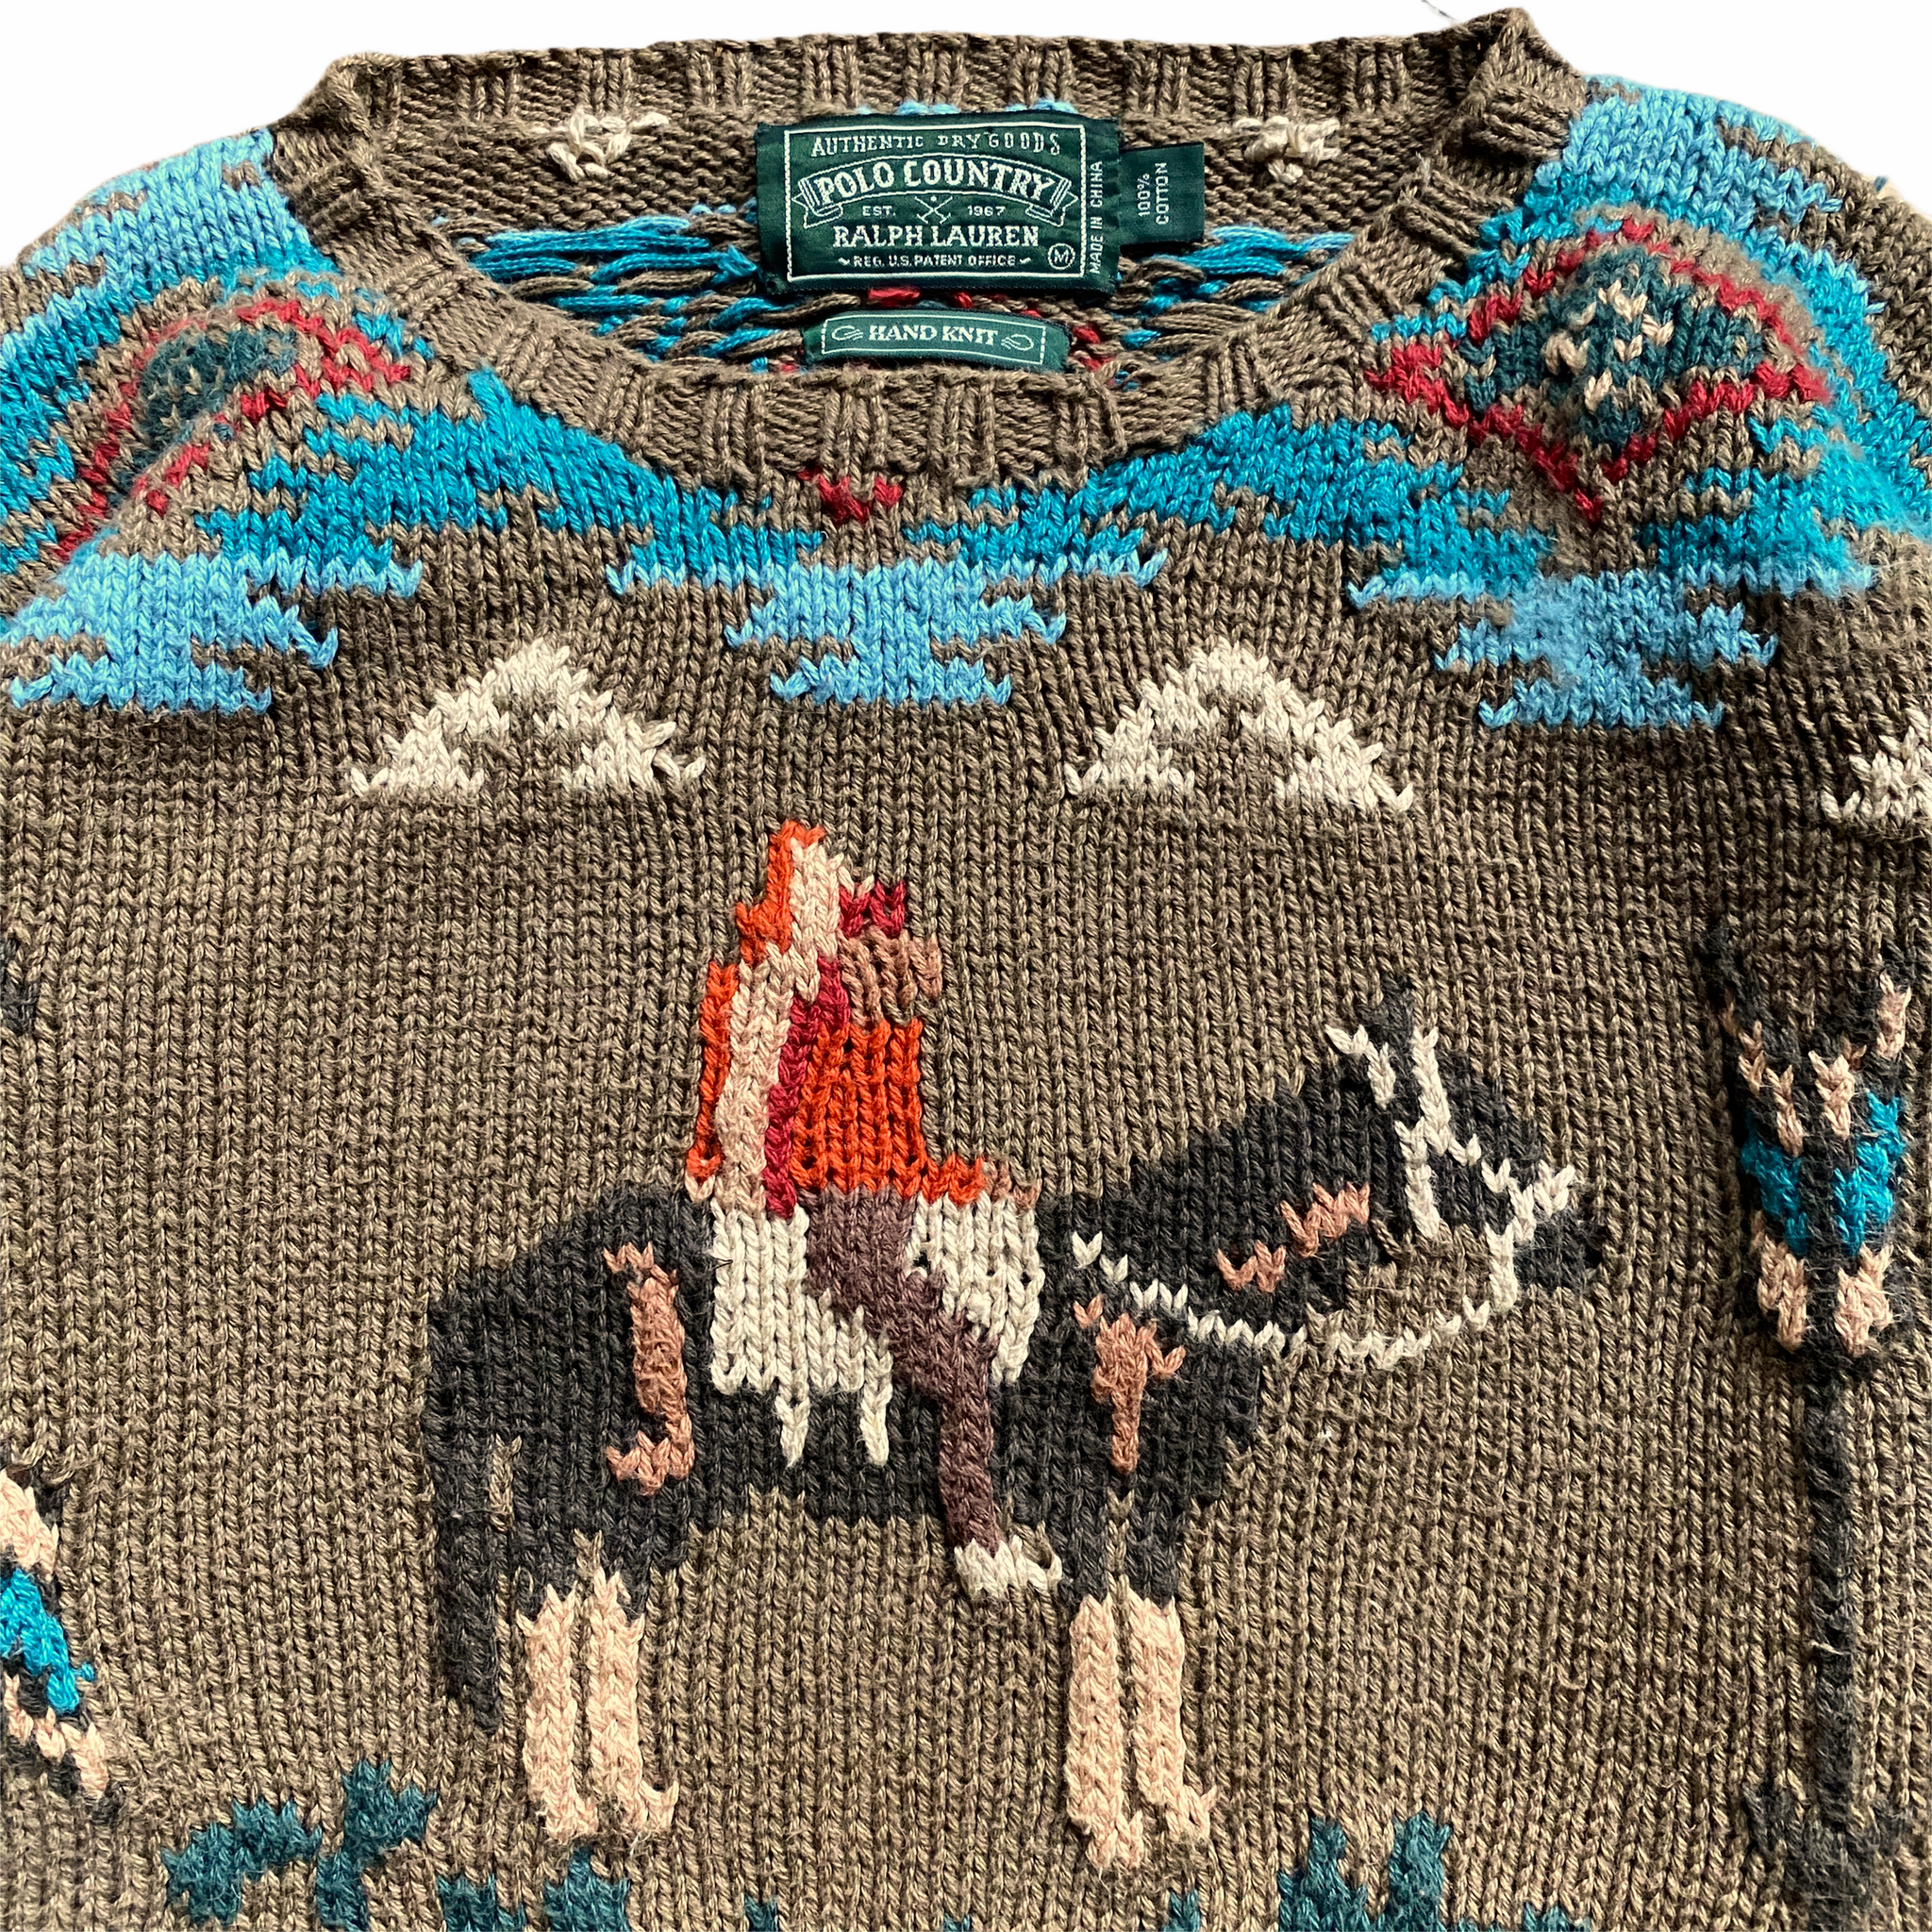 Polo country by Ralph lauren navajo cotton sweater. Medium